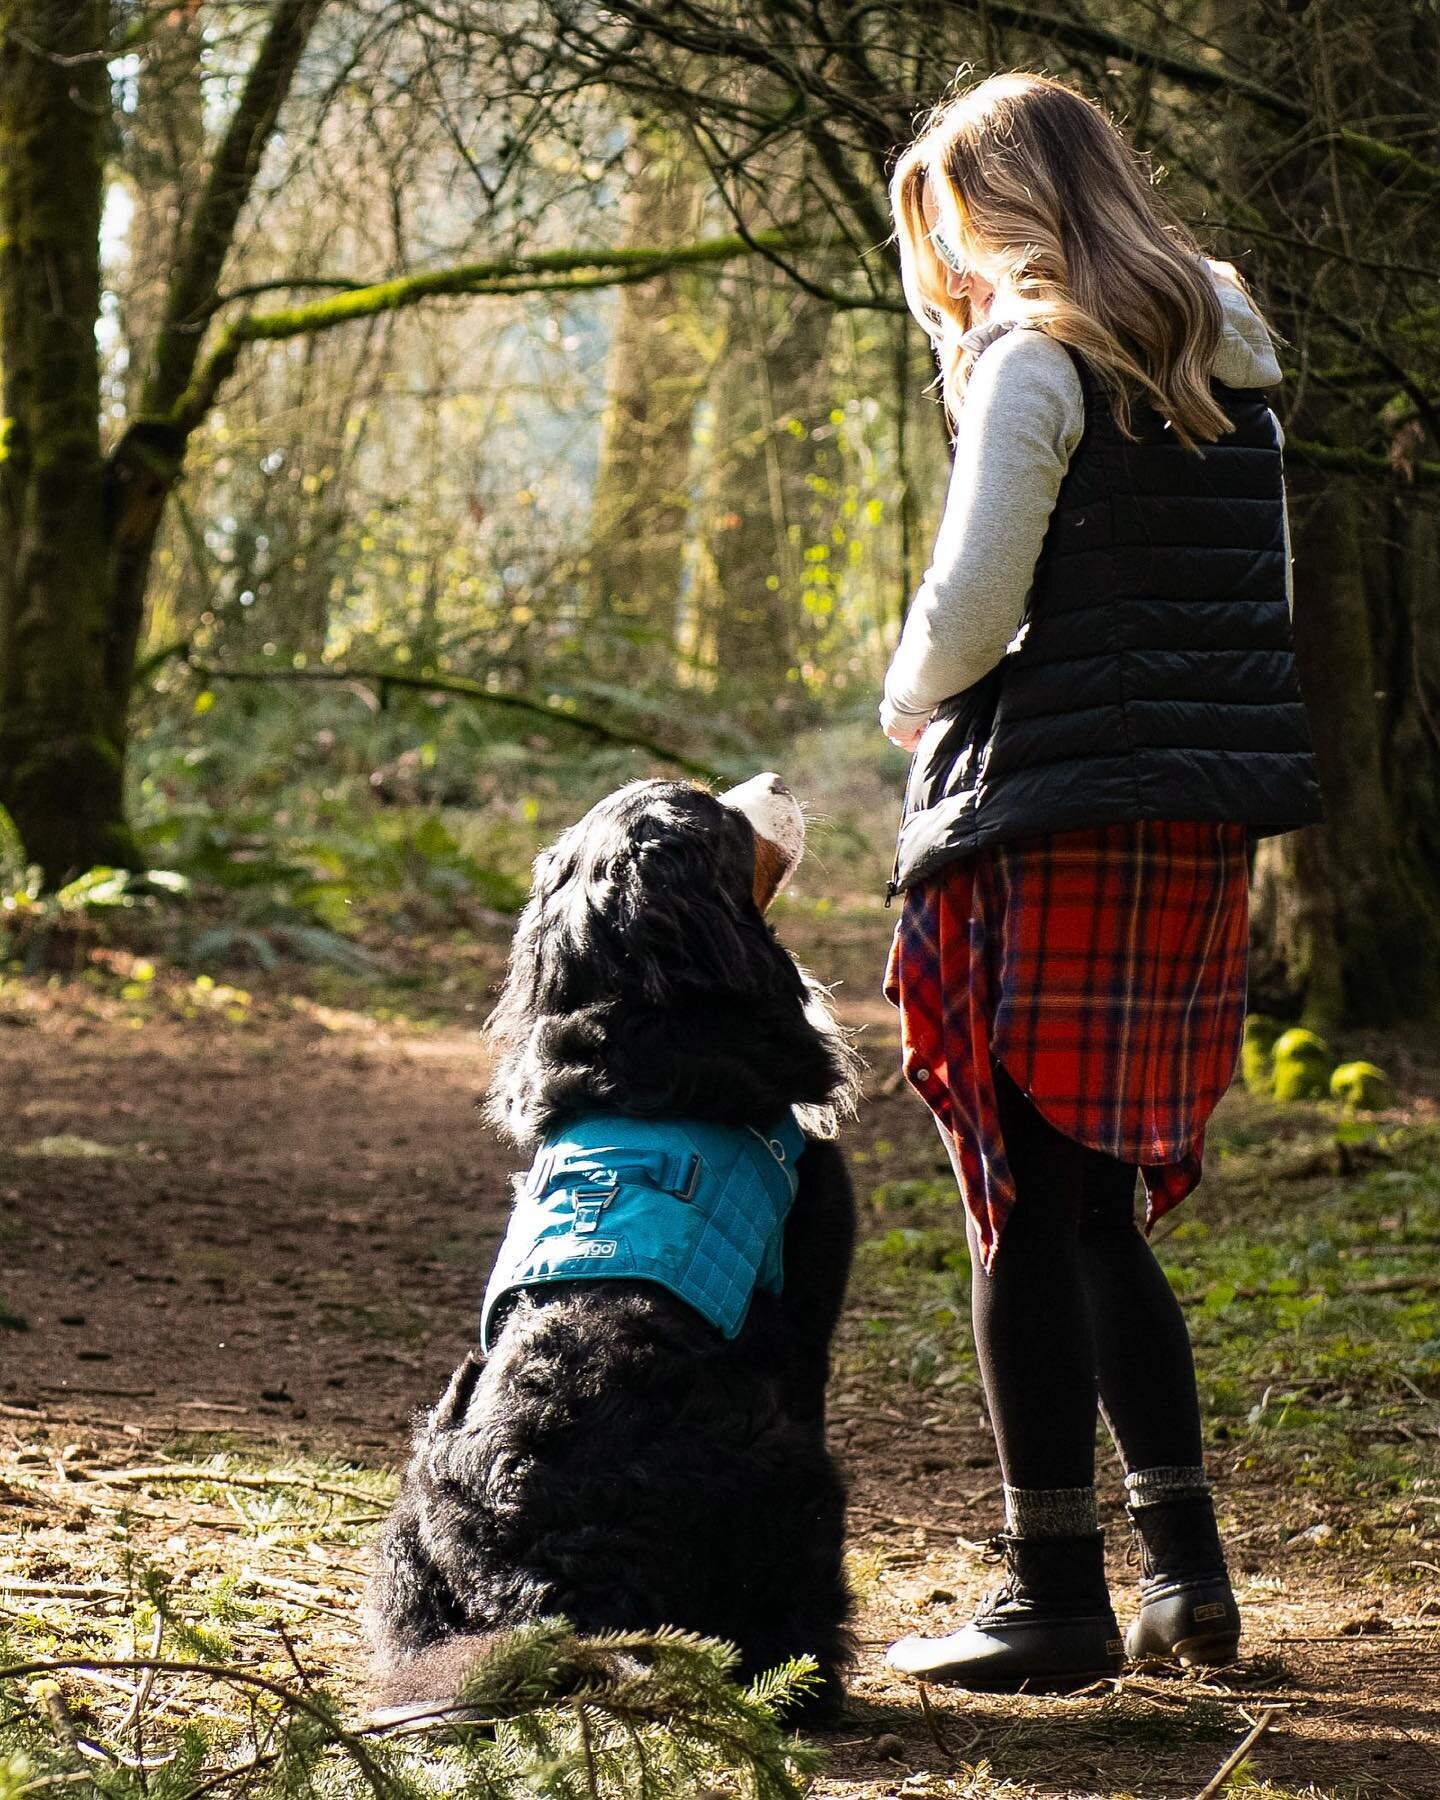 Things aren&rsquo;t quite as scary when you have a best furiend by your side. 

Tag your bestie and let them know how special they are. ❤️🐾

📸: @krystalglassphotography 

#bestfuriends #girlsbestfriend #dogmom #kurgotogether #bernesemountaindog #do